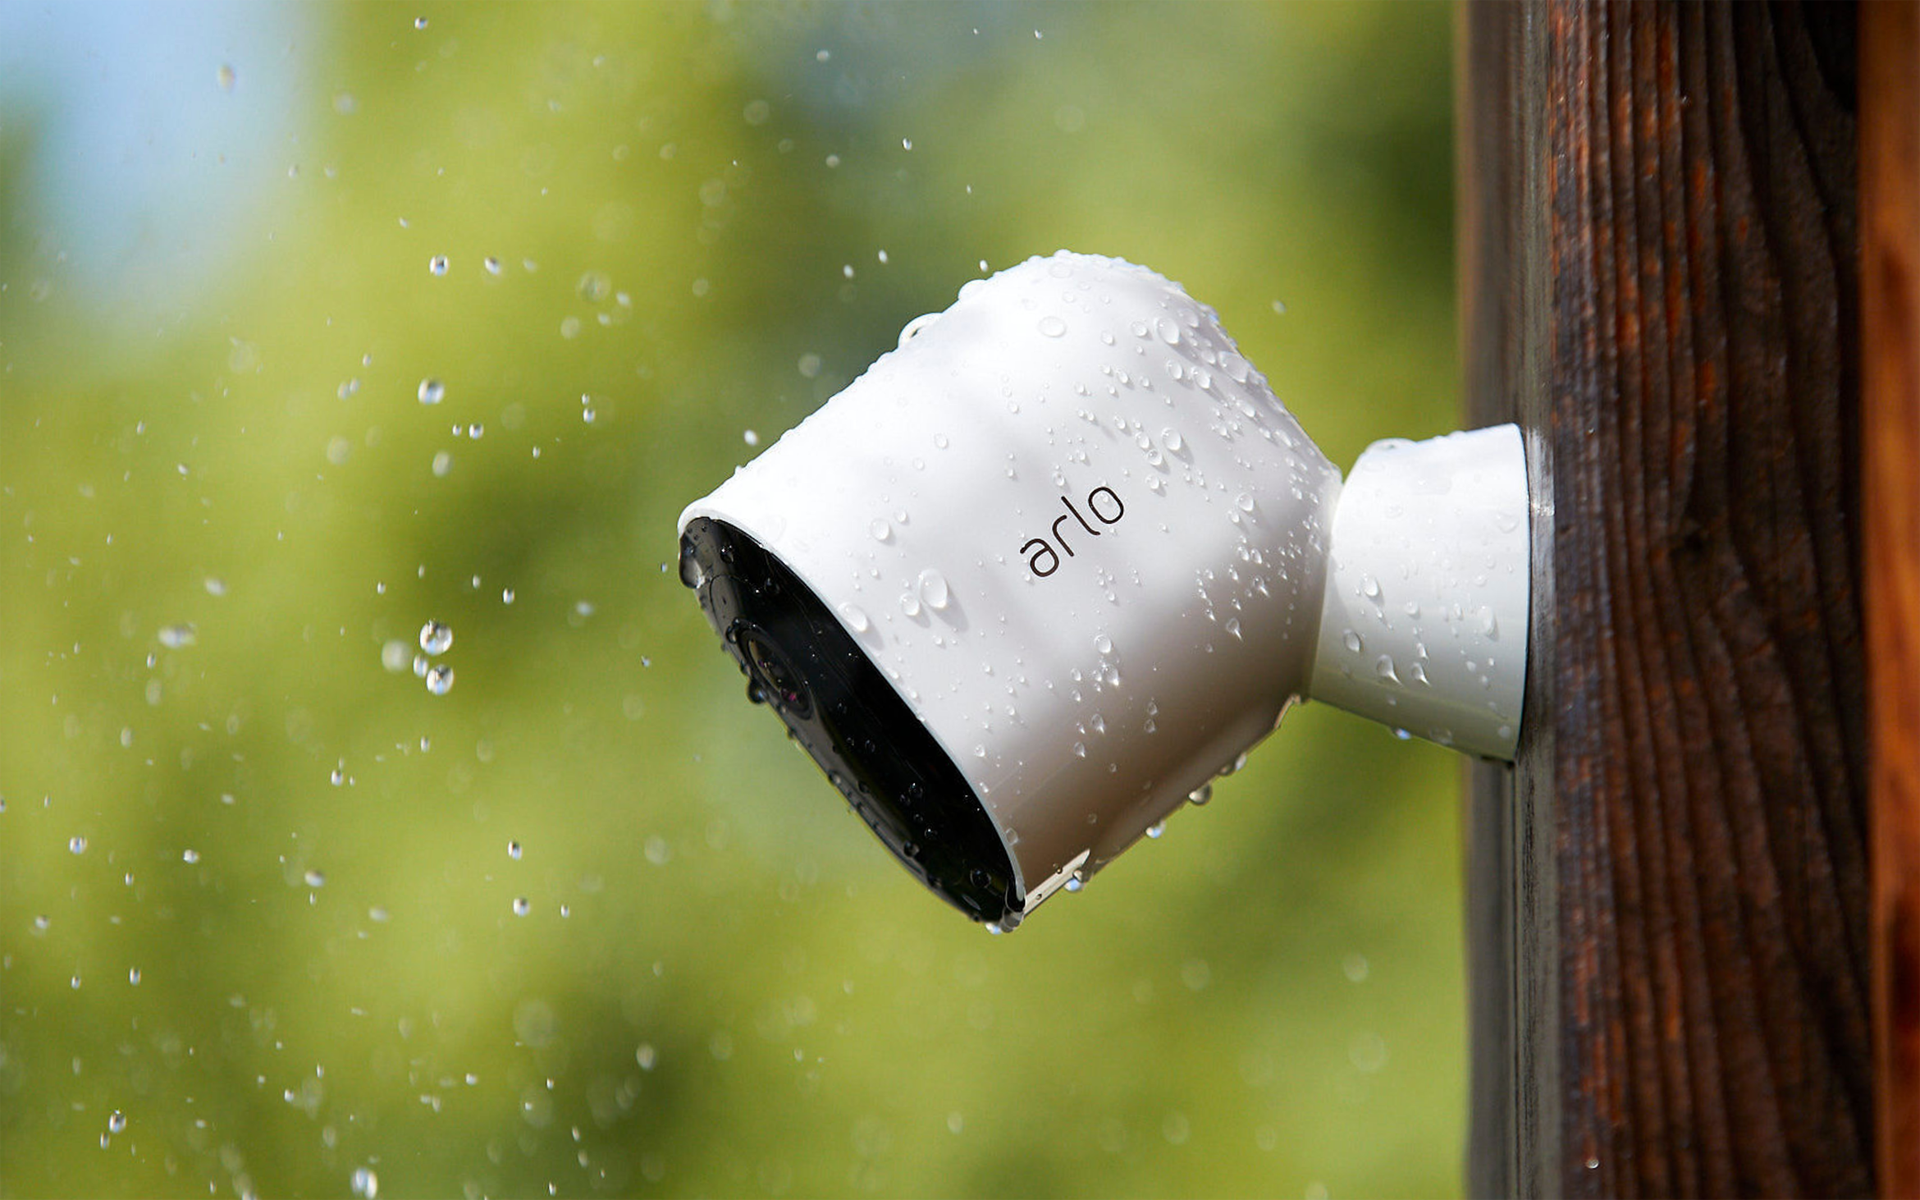 The Arlo Pro 3 camera works in rainy days. It's weather-resistant.